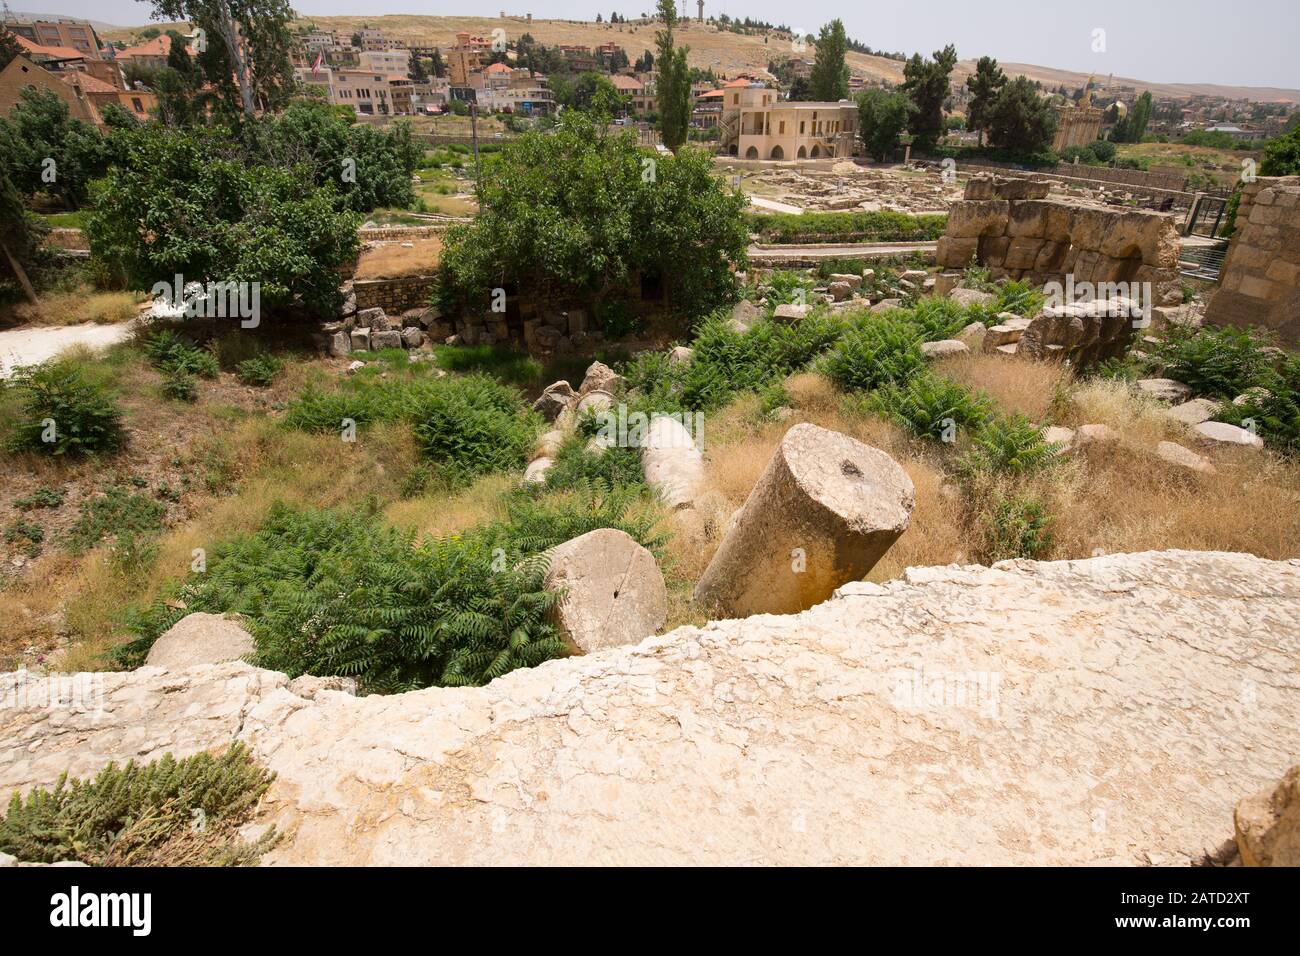 The ruins of the Roman city of Heliopolis or Baalbek in the Beqaa Valley. Baalbek, Lebanon - June, 2019 Stock Photo